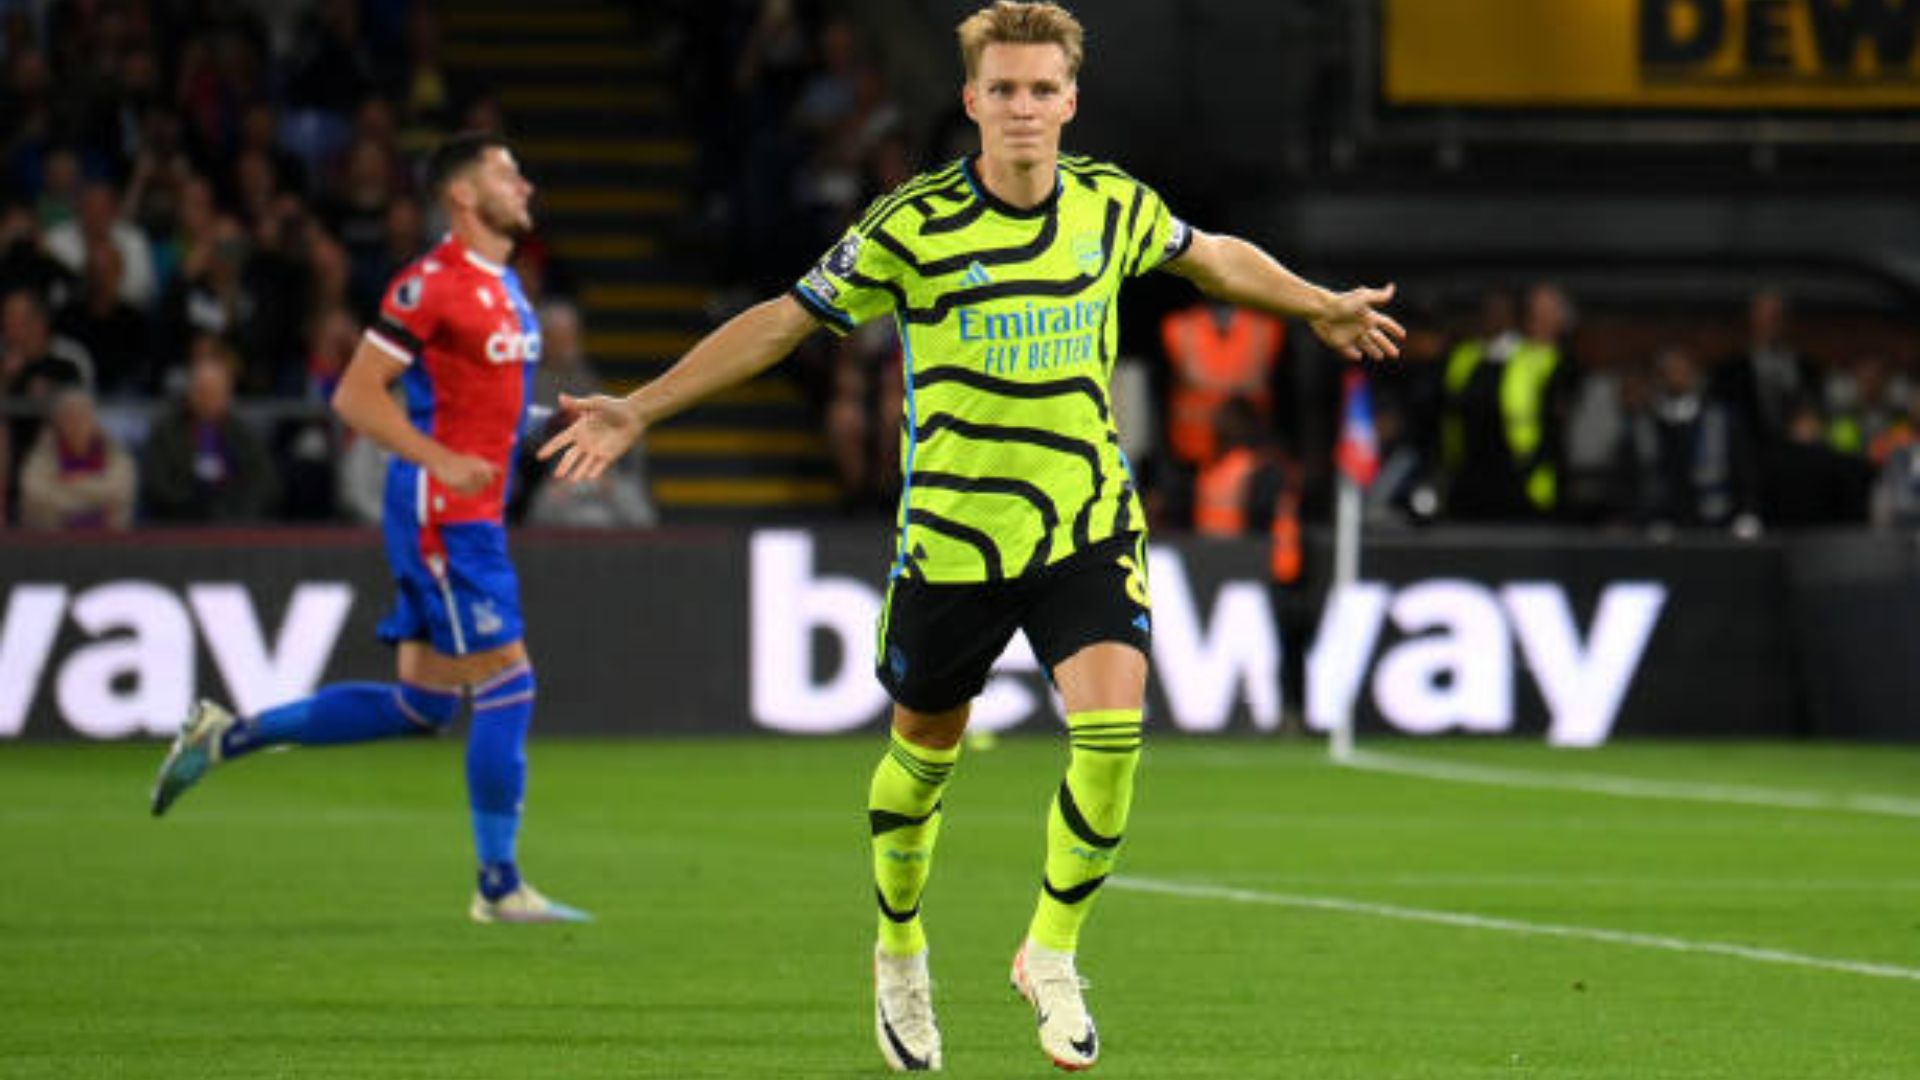 ‘WE ARE LUCKY TO HAVE HIM’: MARTIN ODEGAARD SPEAKS ON ARSENAL 24-YEAR-OLD STAR